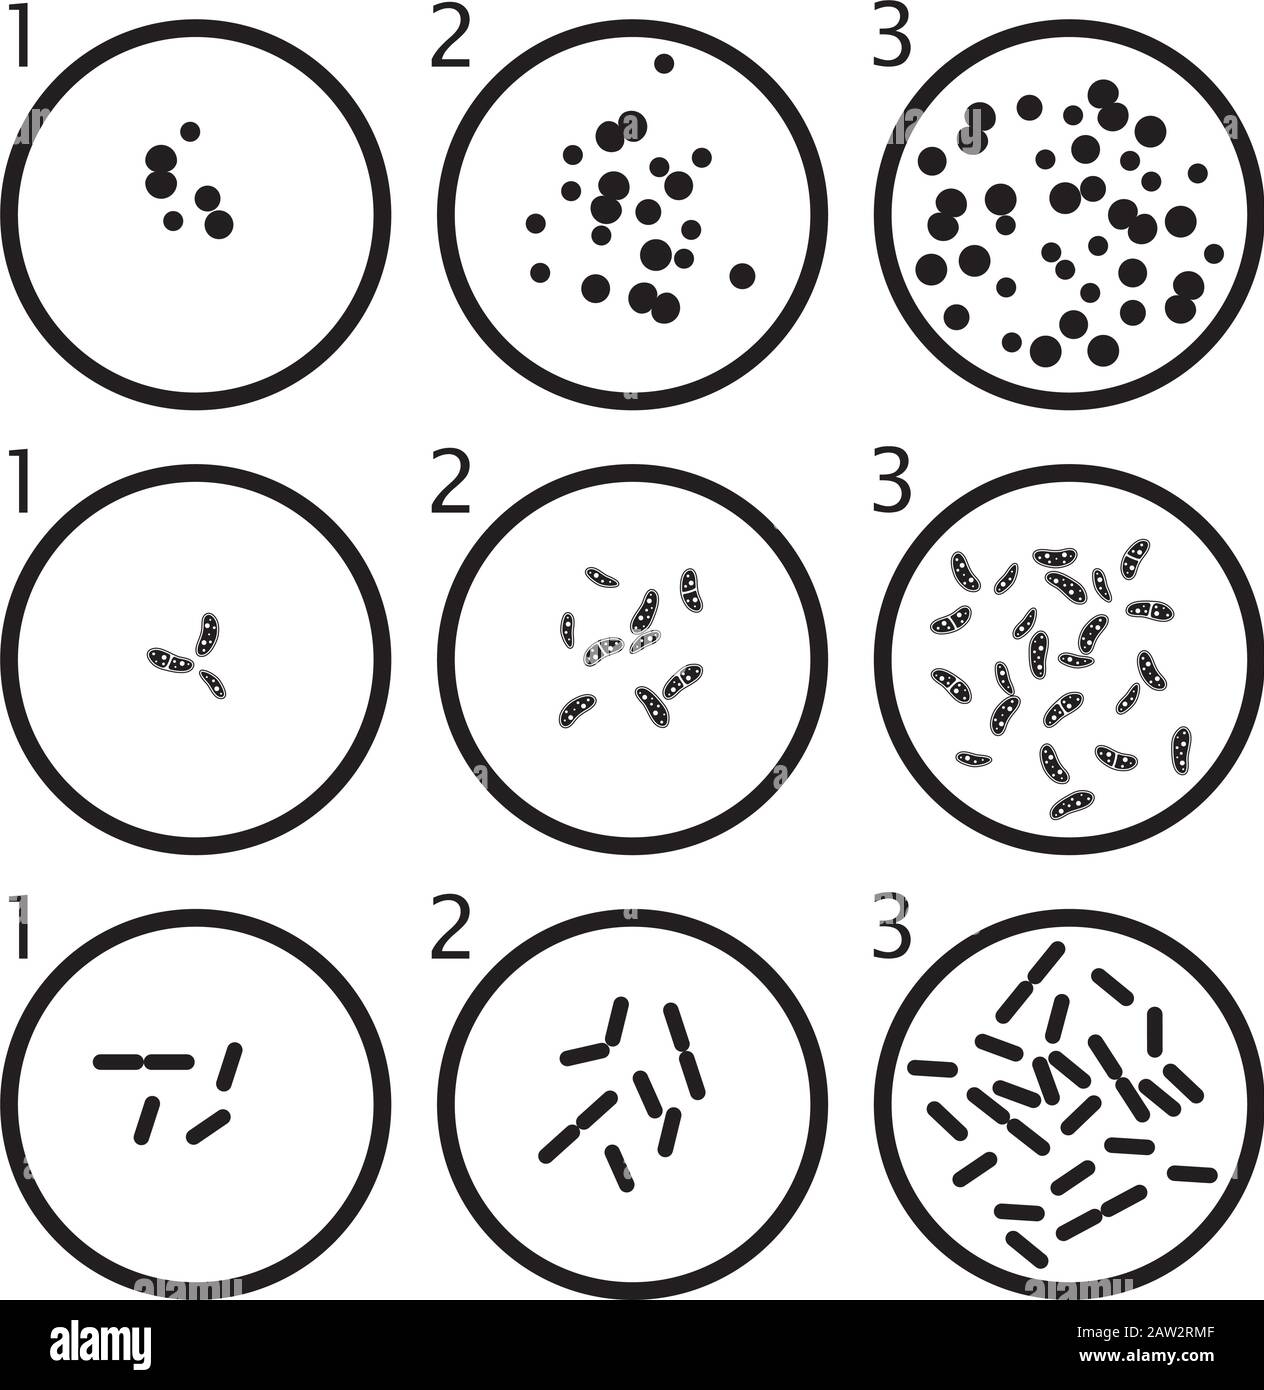 vector bacteria growth stages. black bacterium cells in petri dishes isolated on white background Stock Vector